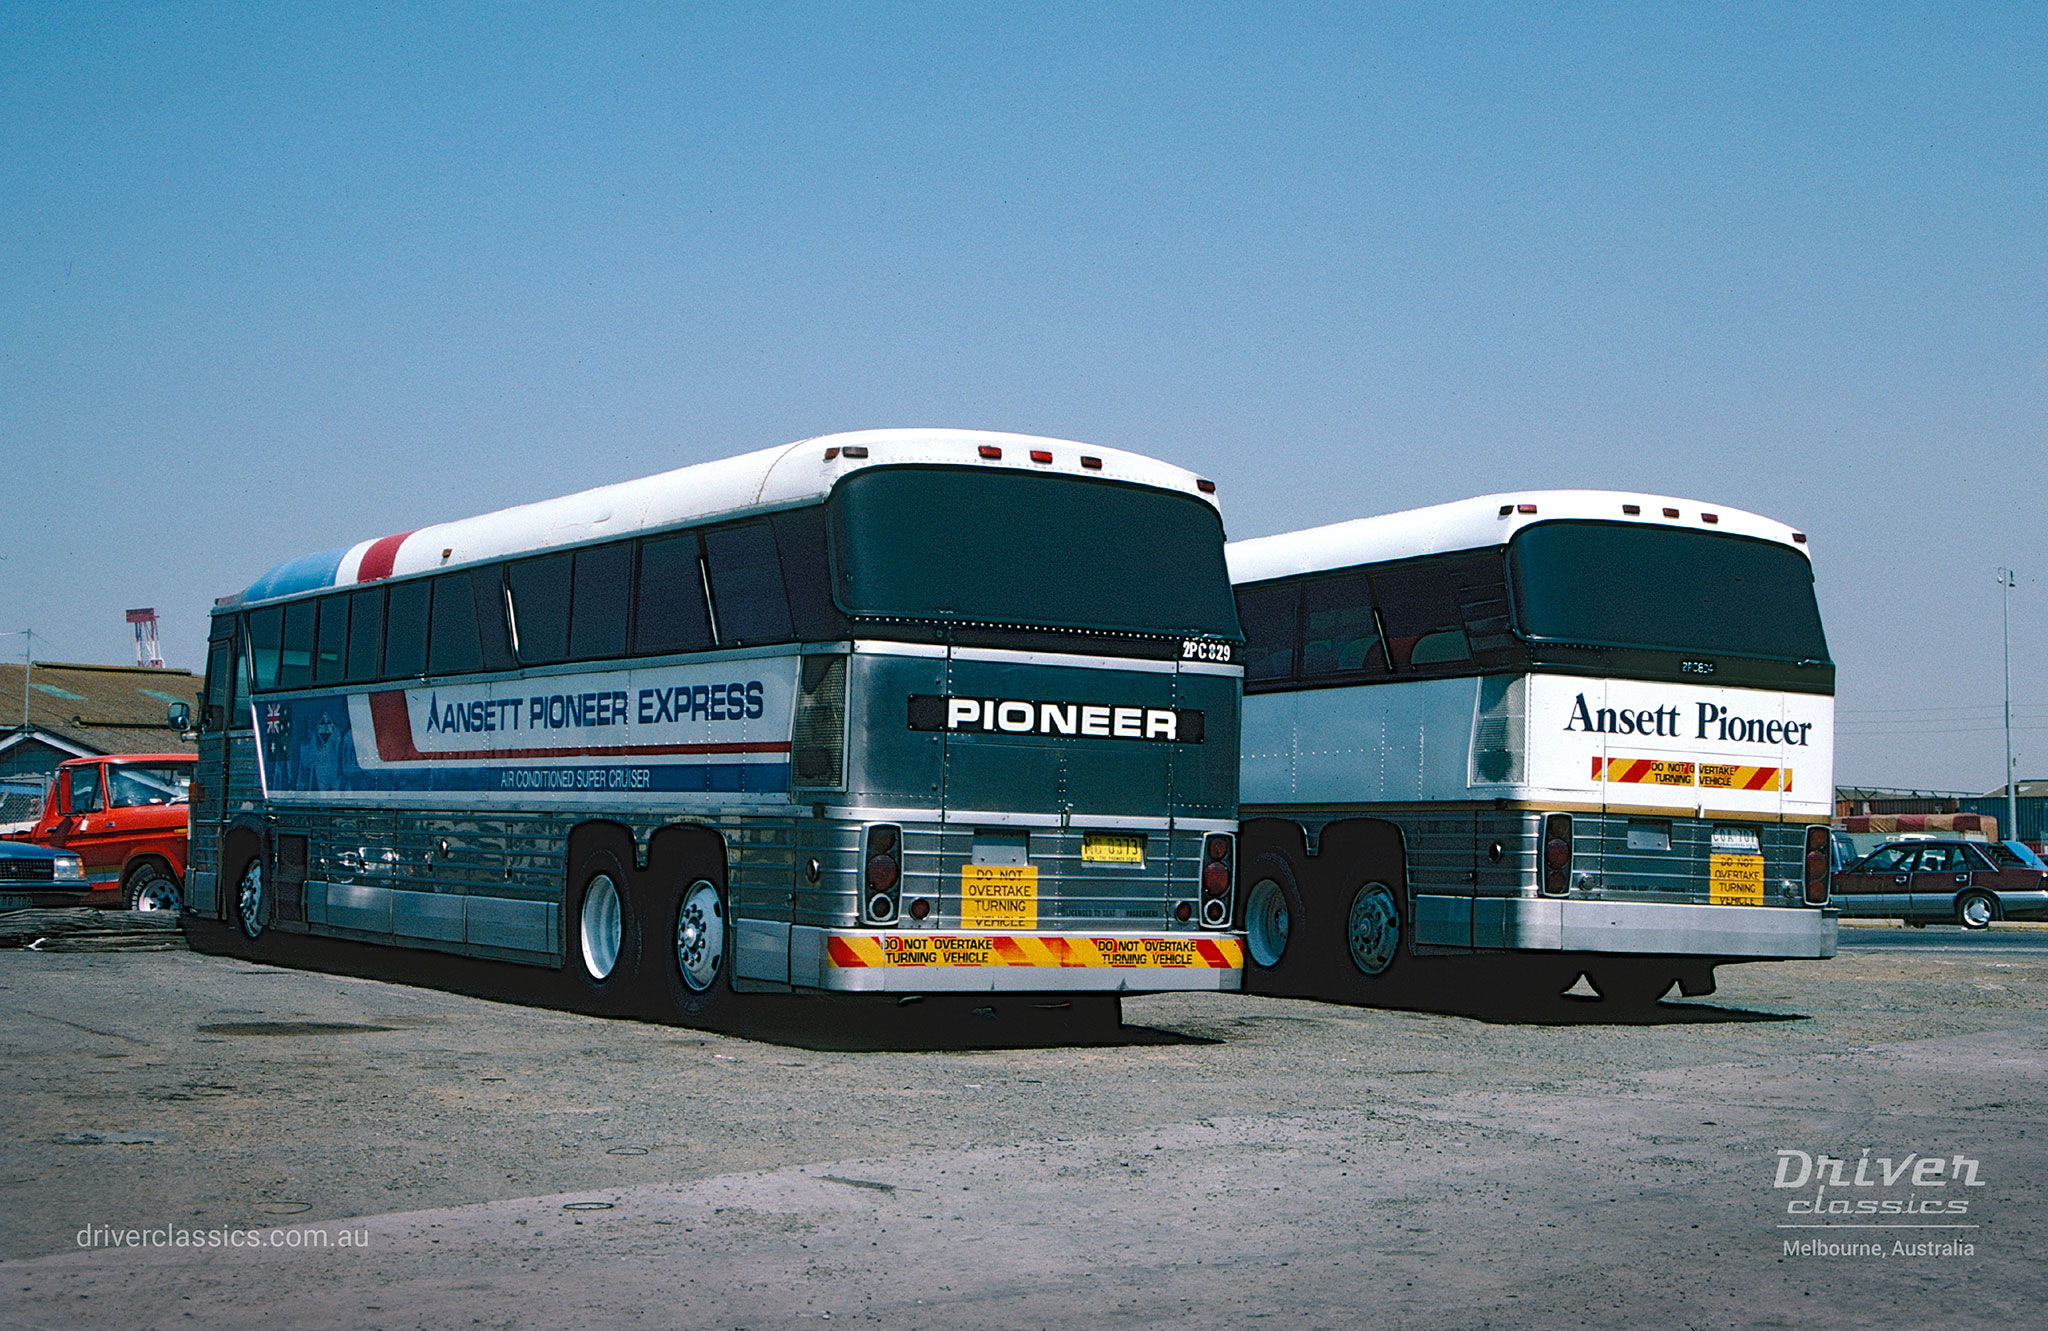 MCI MC8 bus with silver back and MCI MC8 with white back, both featuring Ansett Pioneer livery. Photo taken in 1987.